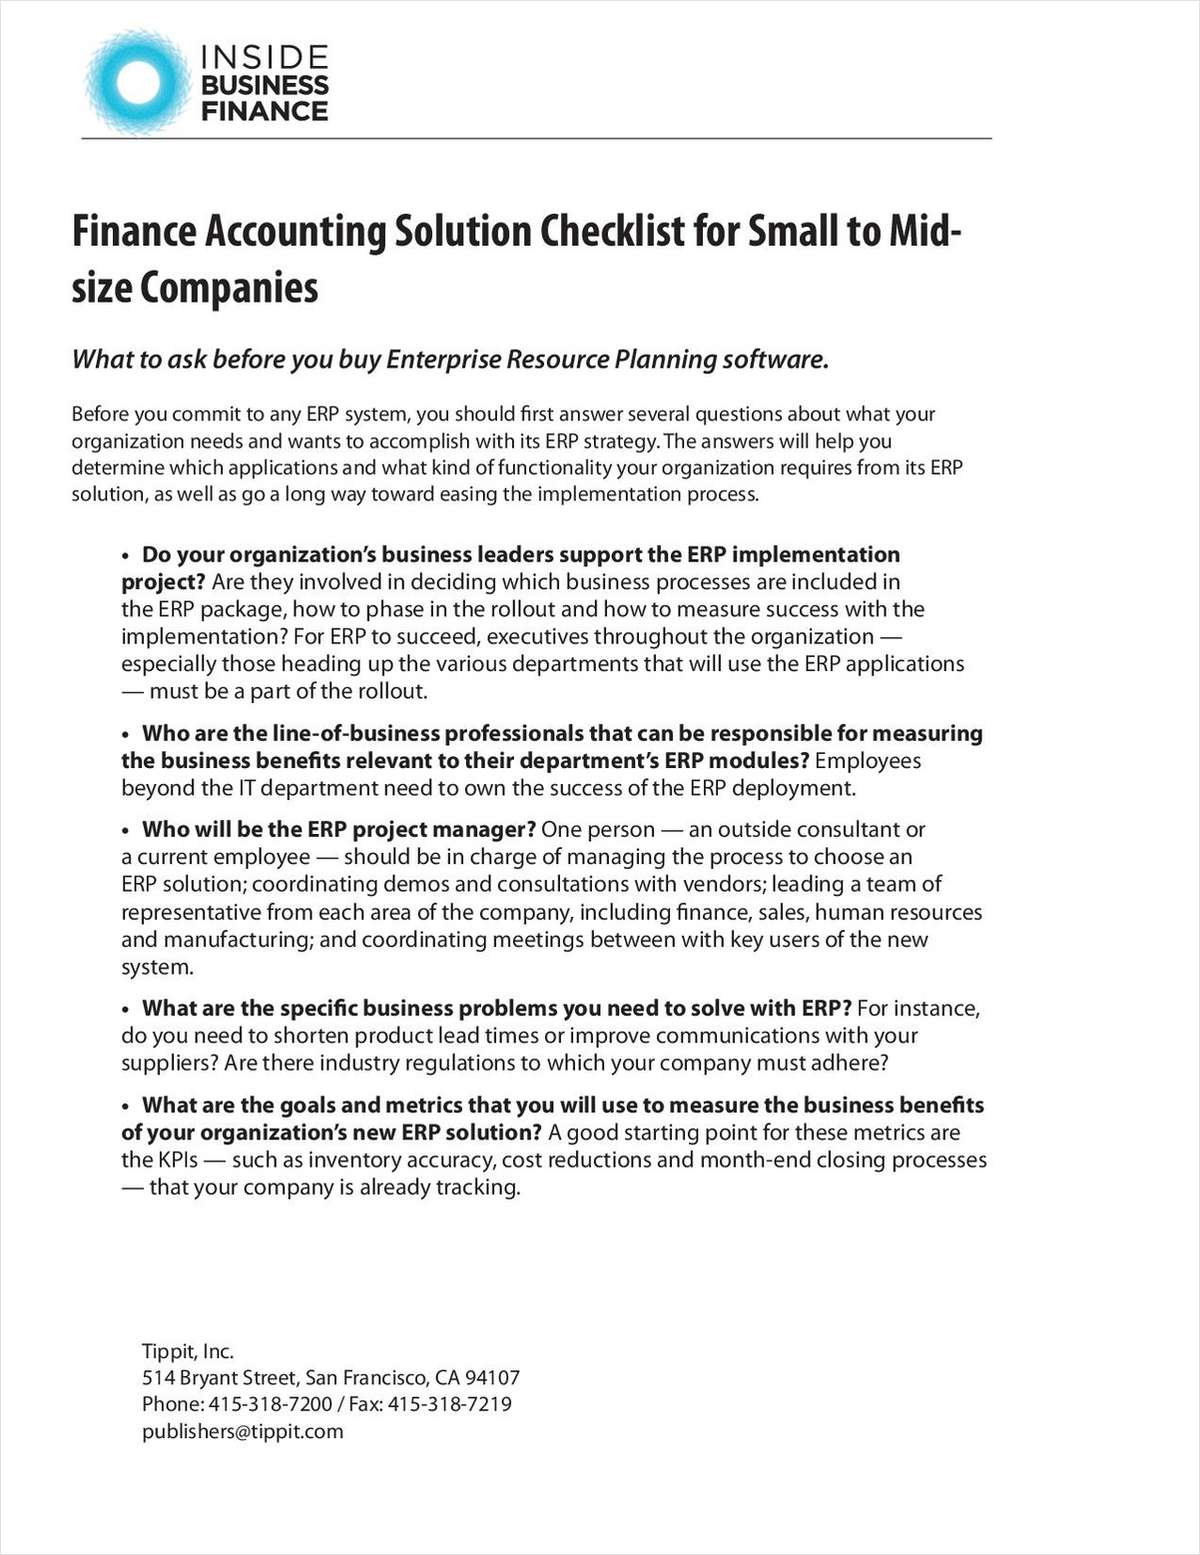 Finance Accounting Solution Checklist for Small to Mid-size Companies